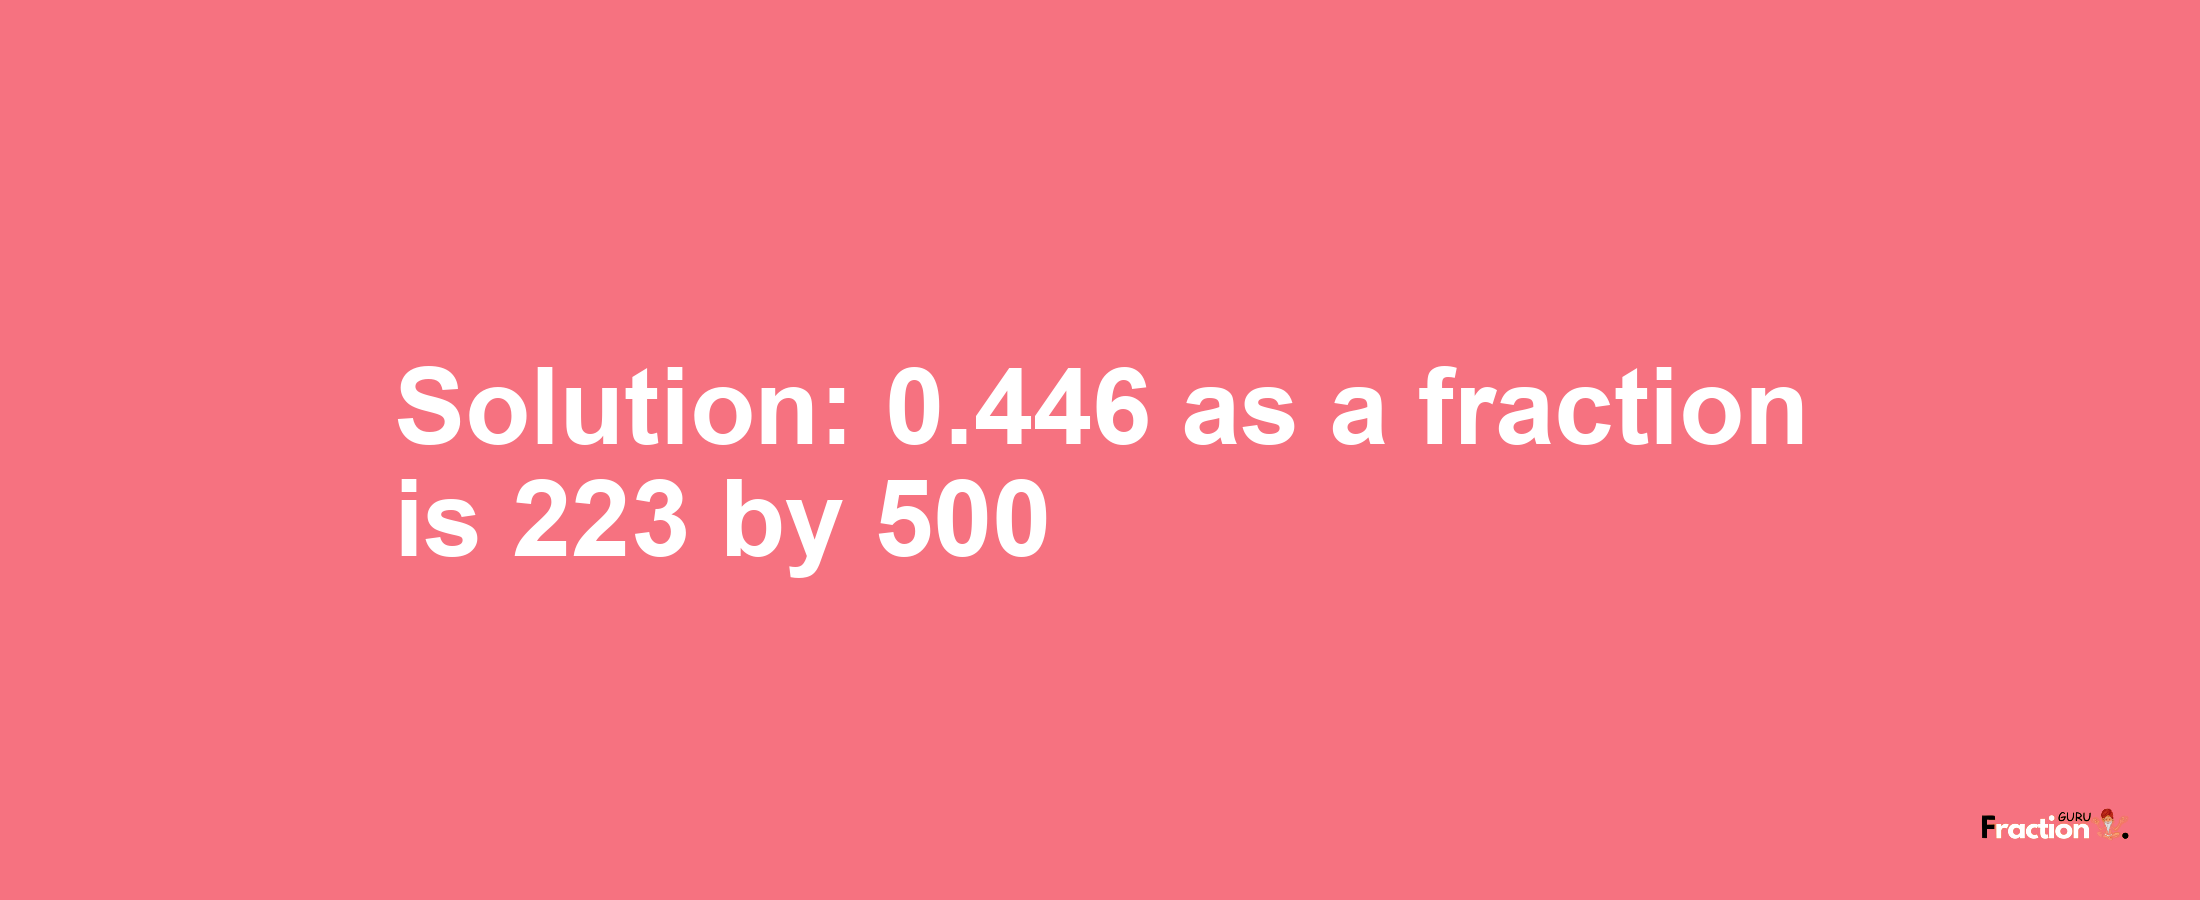 Solution:0.446 as a fraction is 223/500